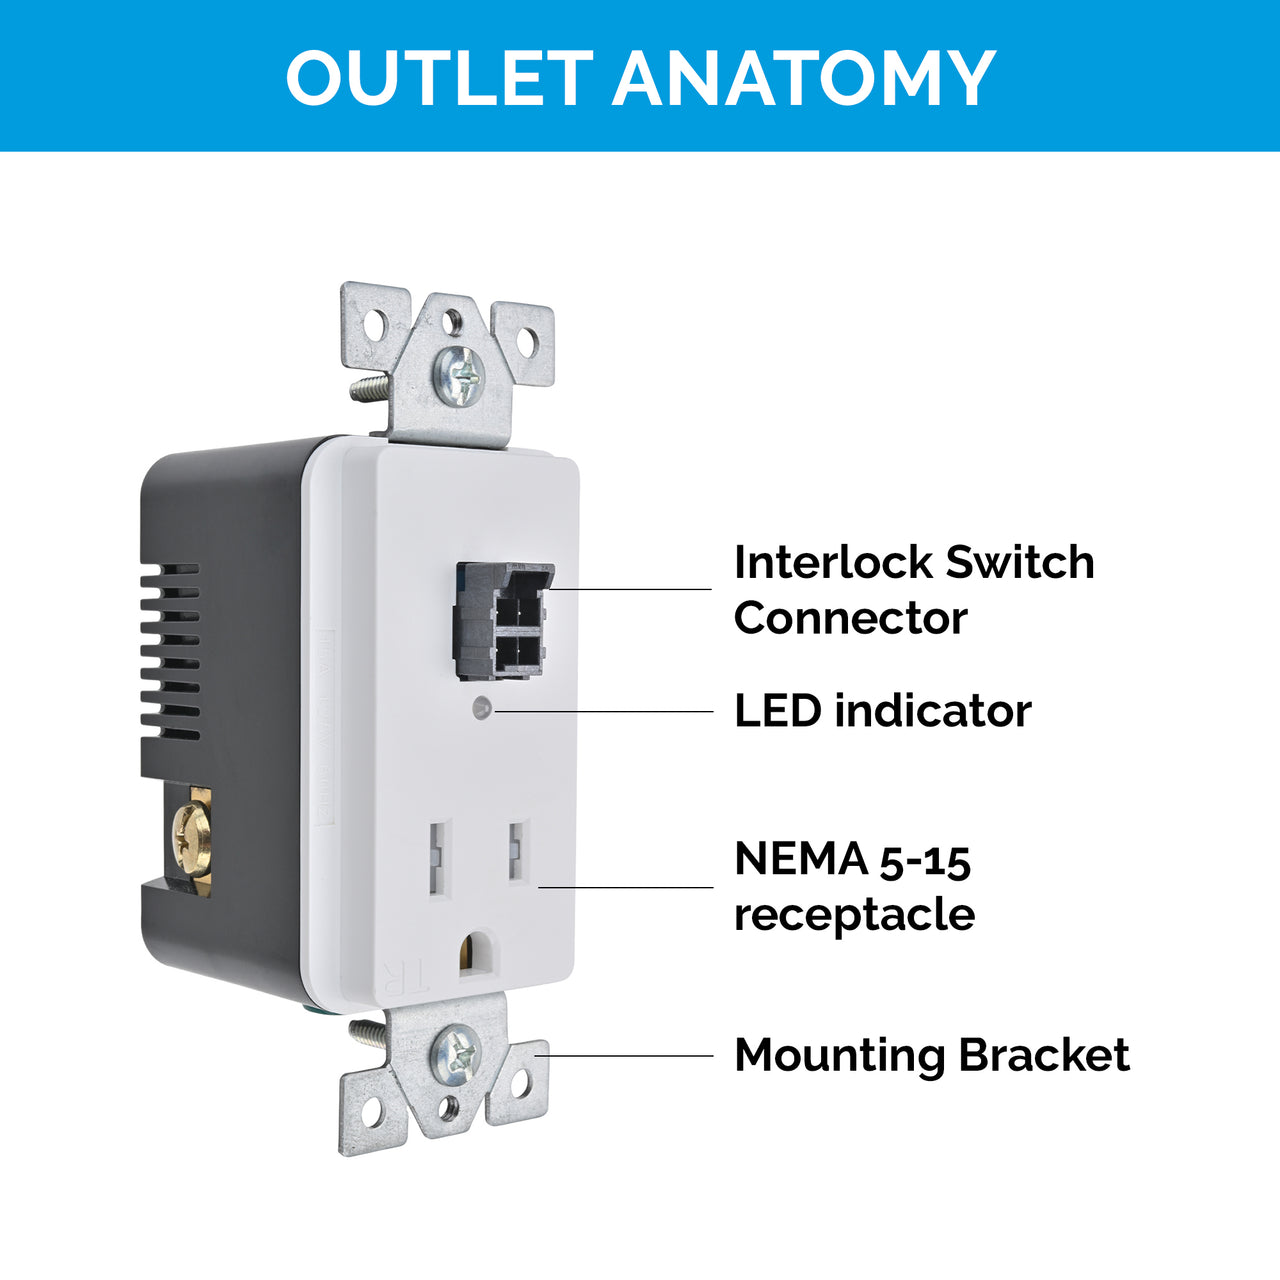 Replacement Safety Interlock Outlet